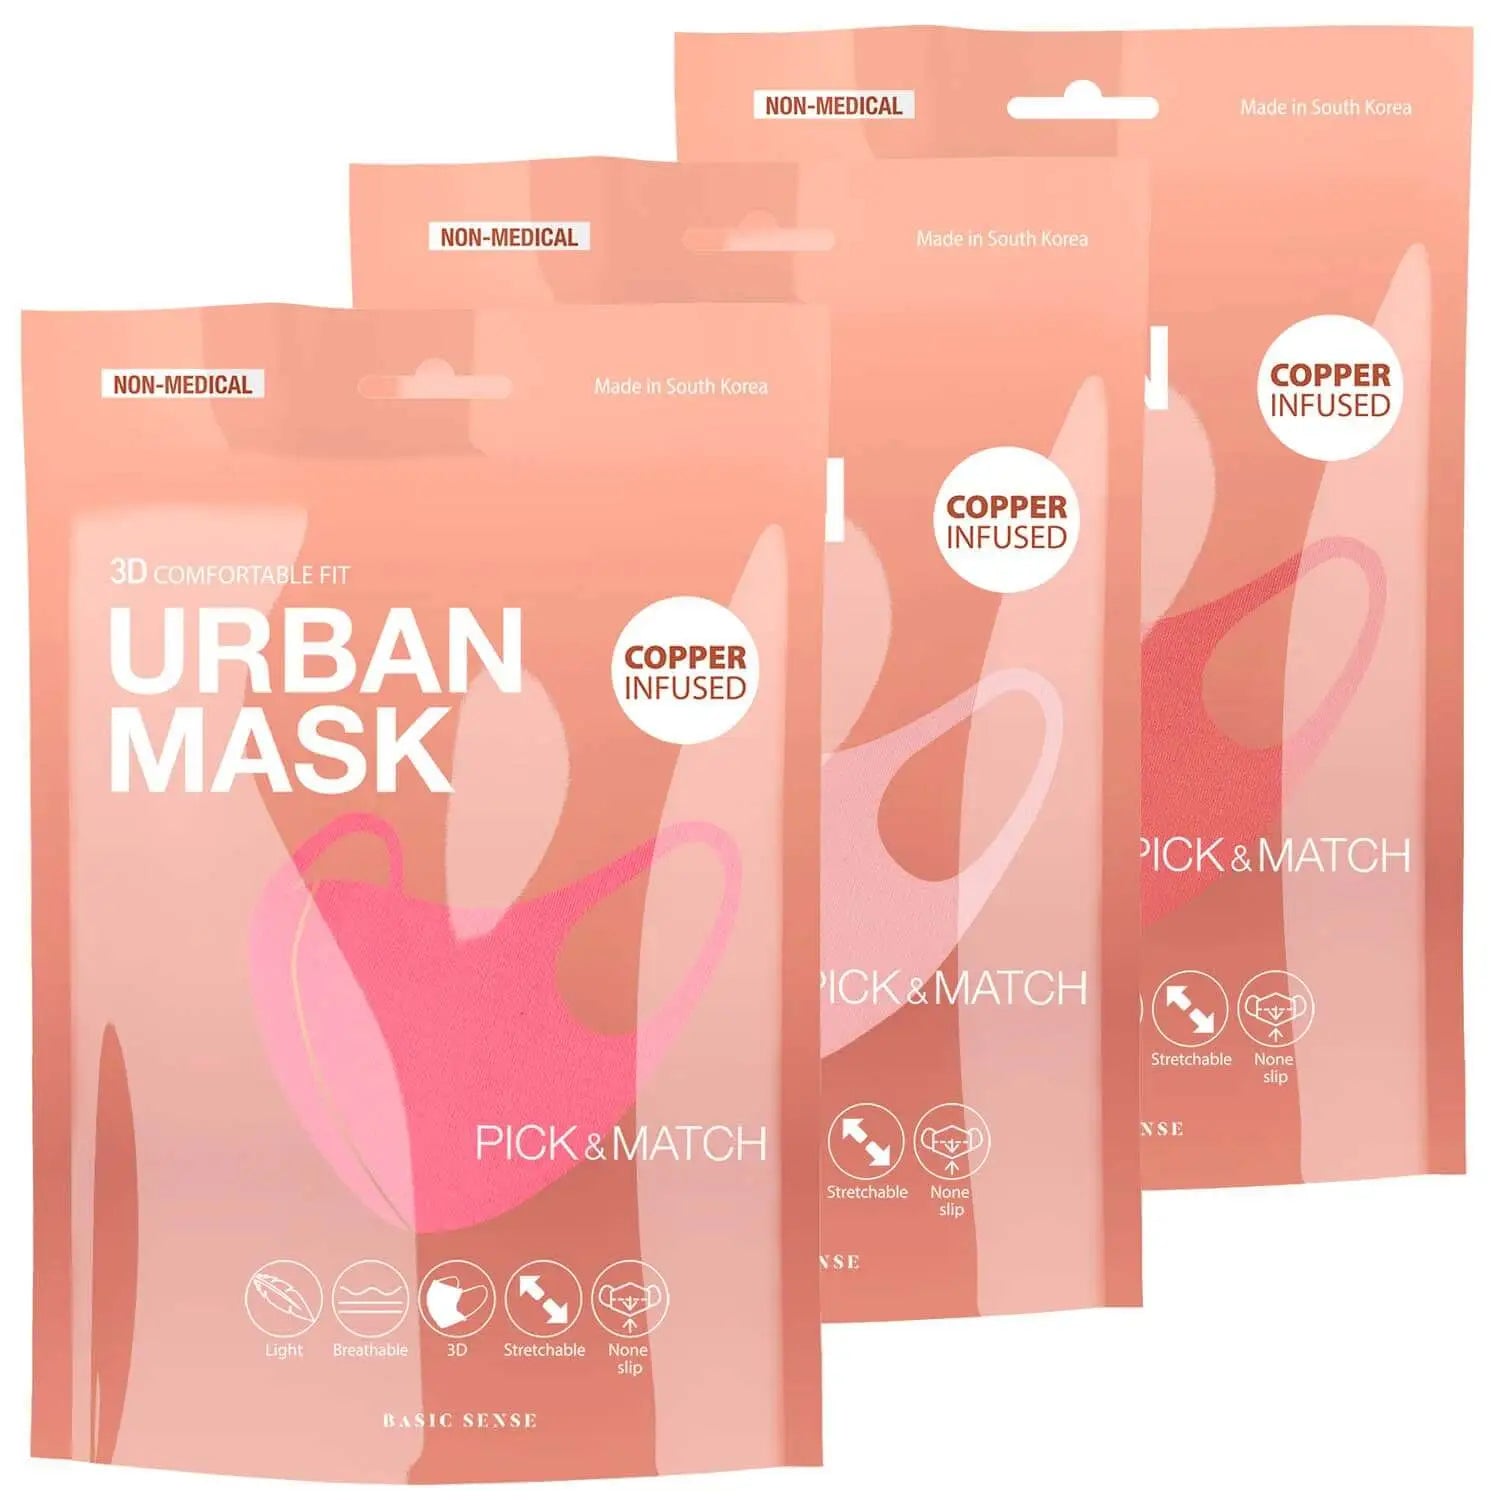 Copper-infused 3-pack lip mask for stylish protection